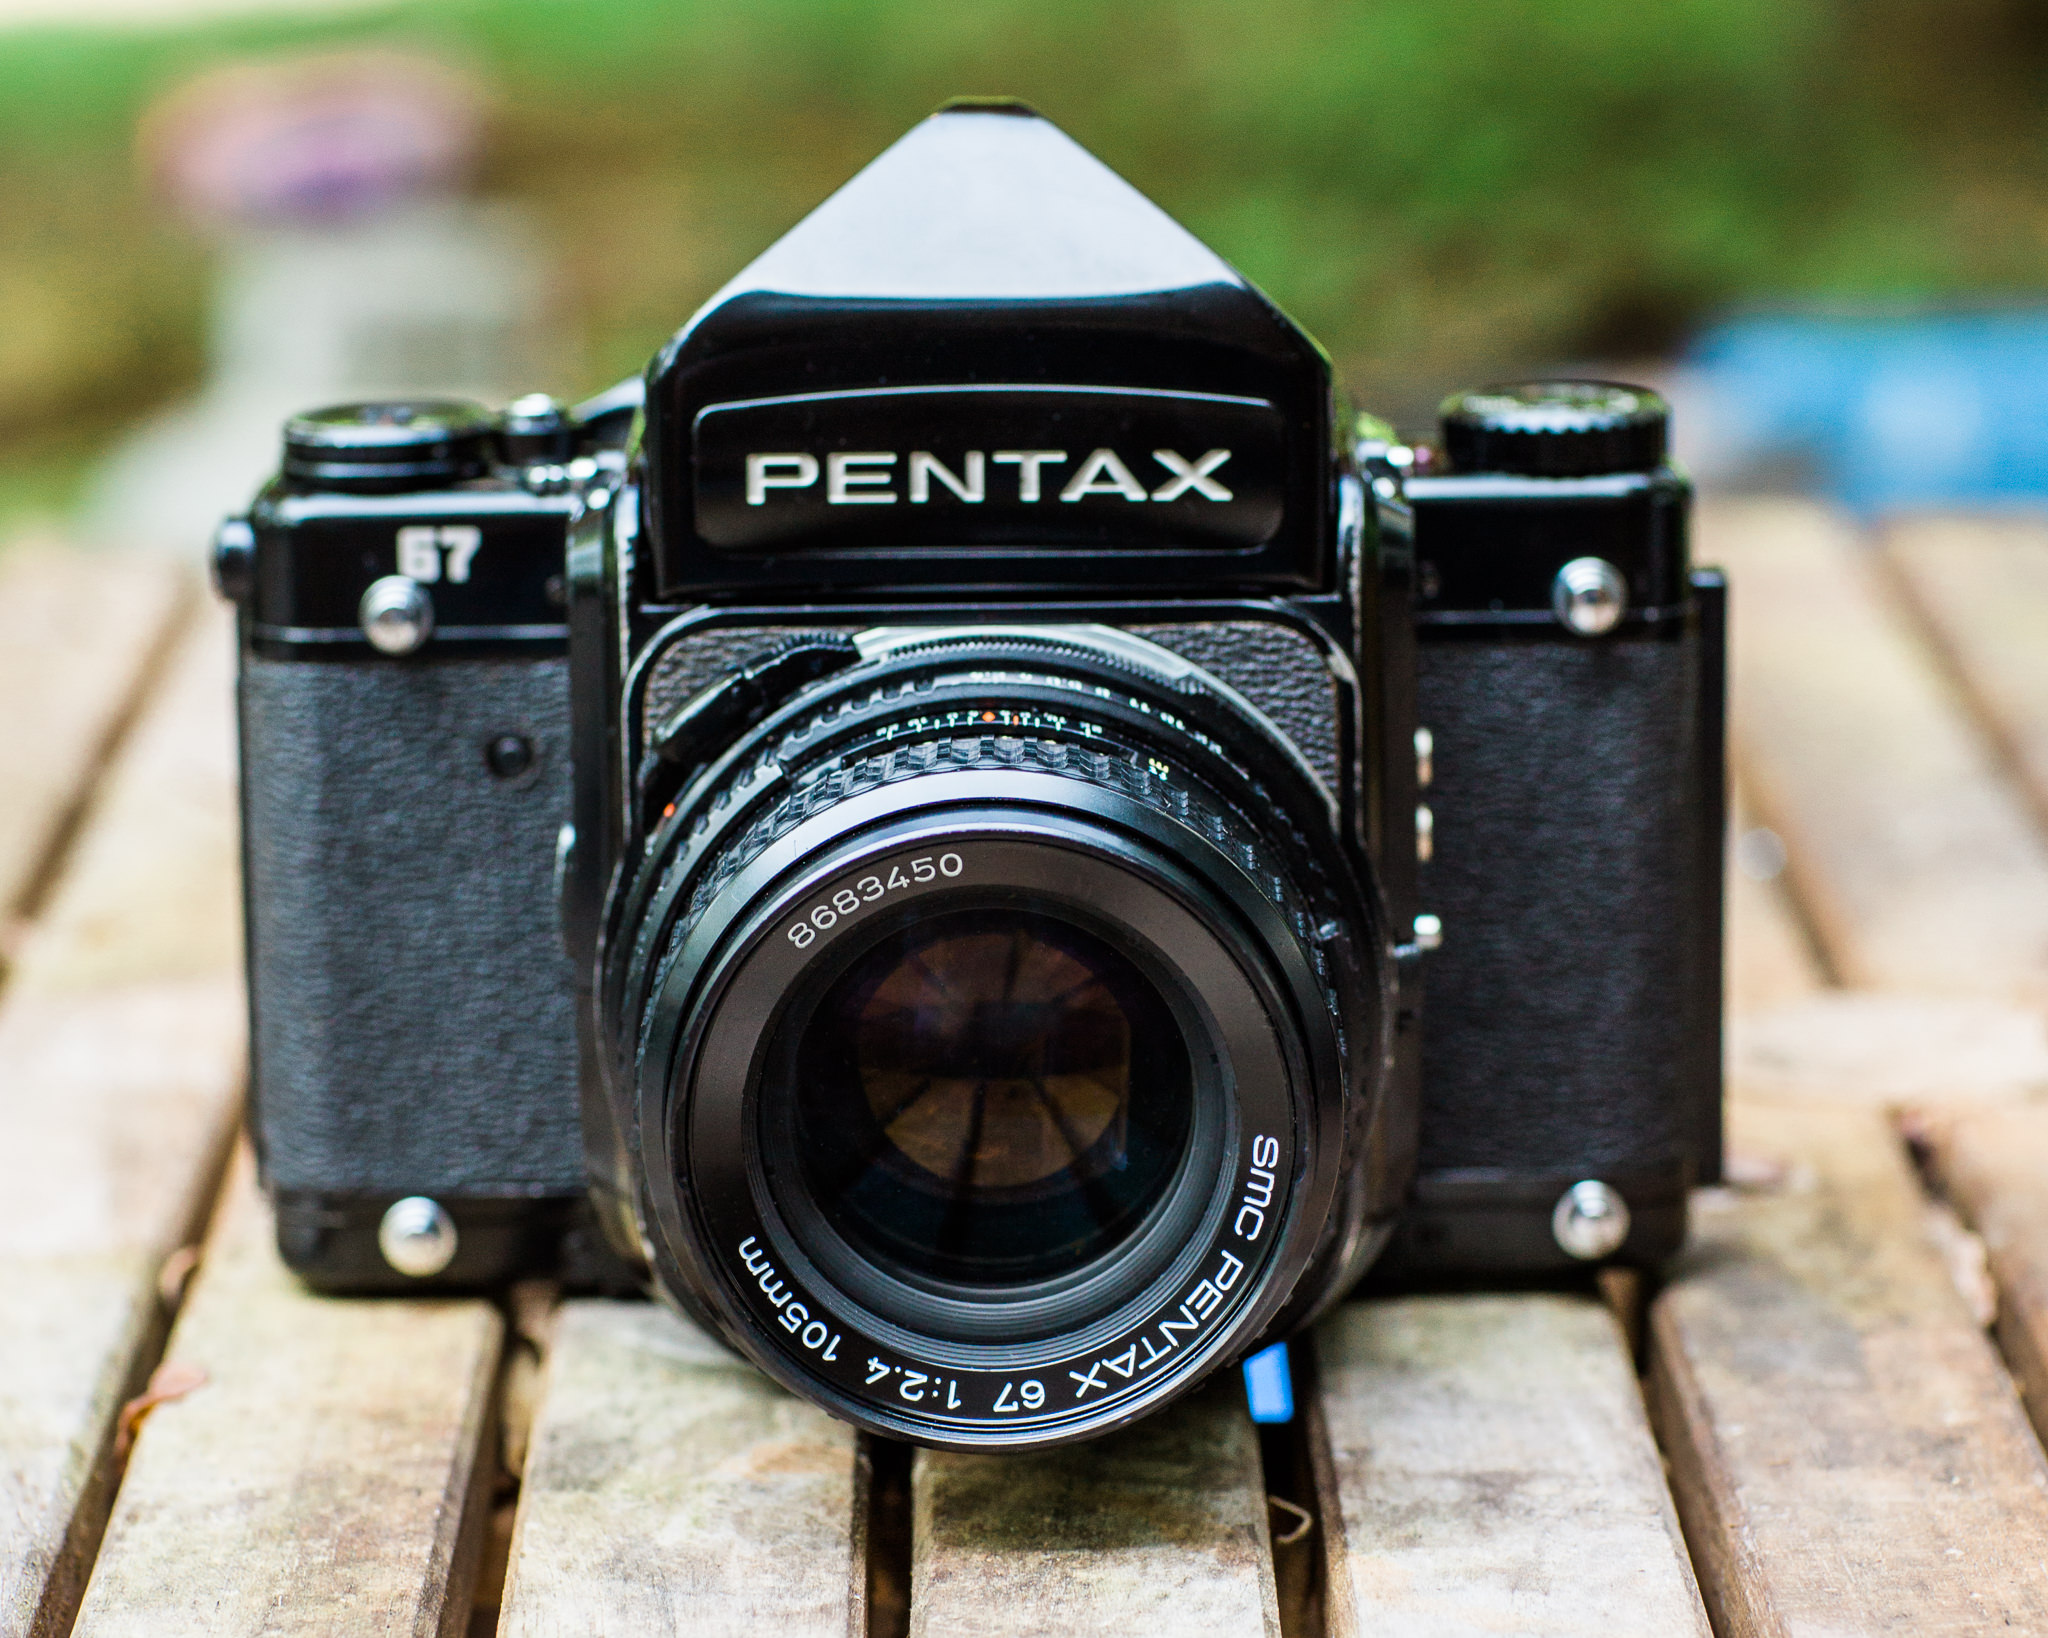 How Can I Tell the Differences Between the Pentax 105mm f/2.4 Lens